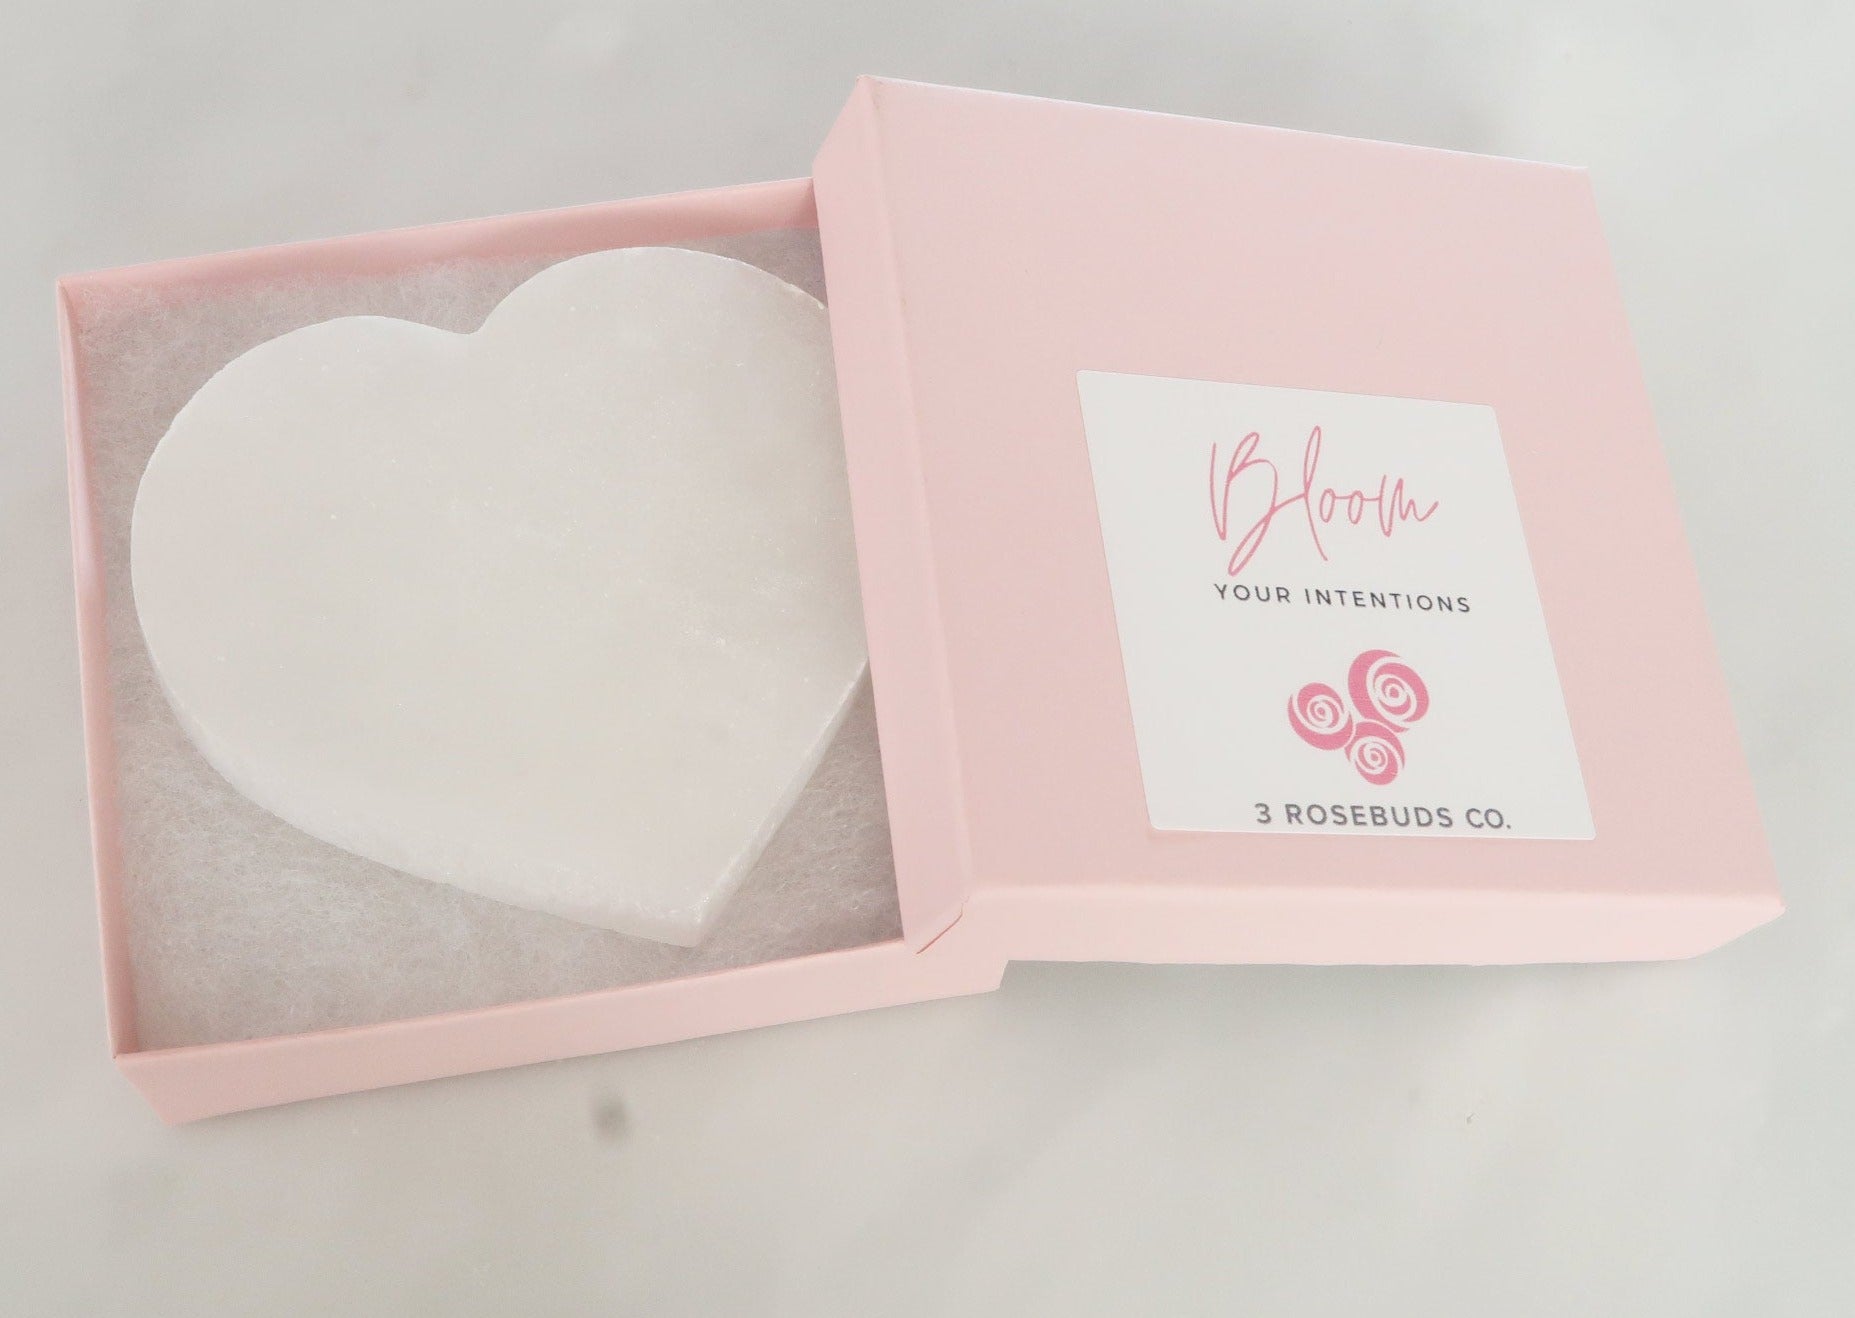 Heart Shaped Selenite Plate to cleanse and recharge your gemstone jewelry. Overtime, our gemstone jewelry absorbs our energy and can break selenite is a great stone that helps cleanse and recharge your jewelry. 